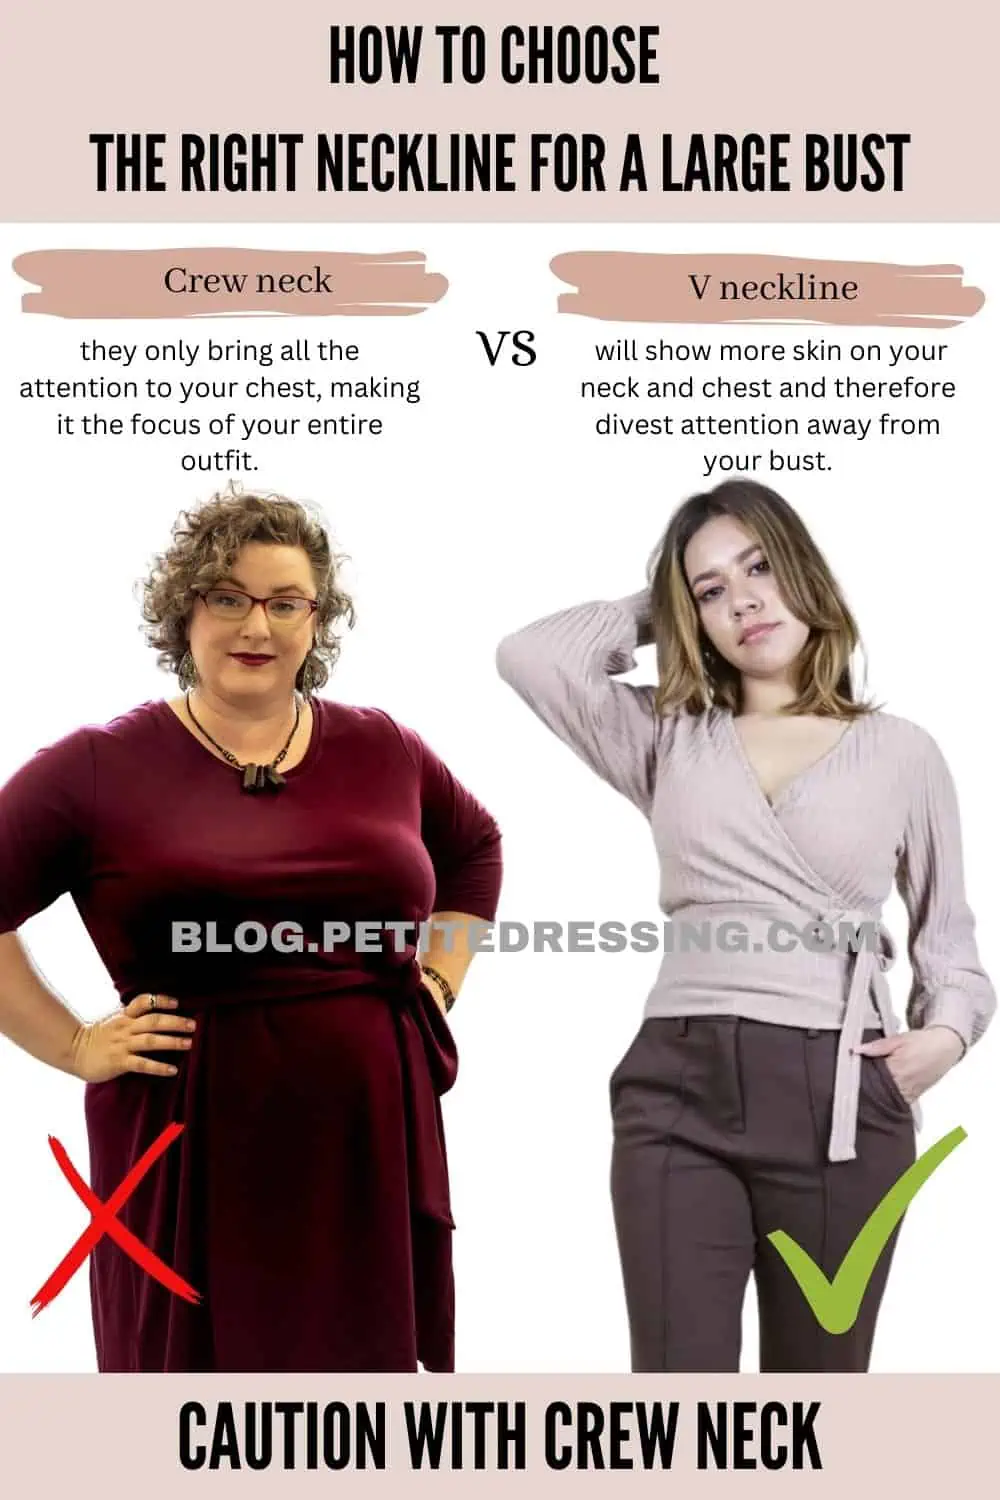 KnowMe Shape - A Blog for the Shapewear Lifestyle: Types of Necklines that  Flatter Larger Busts